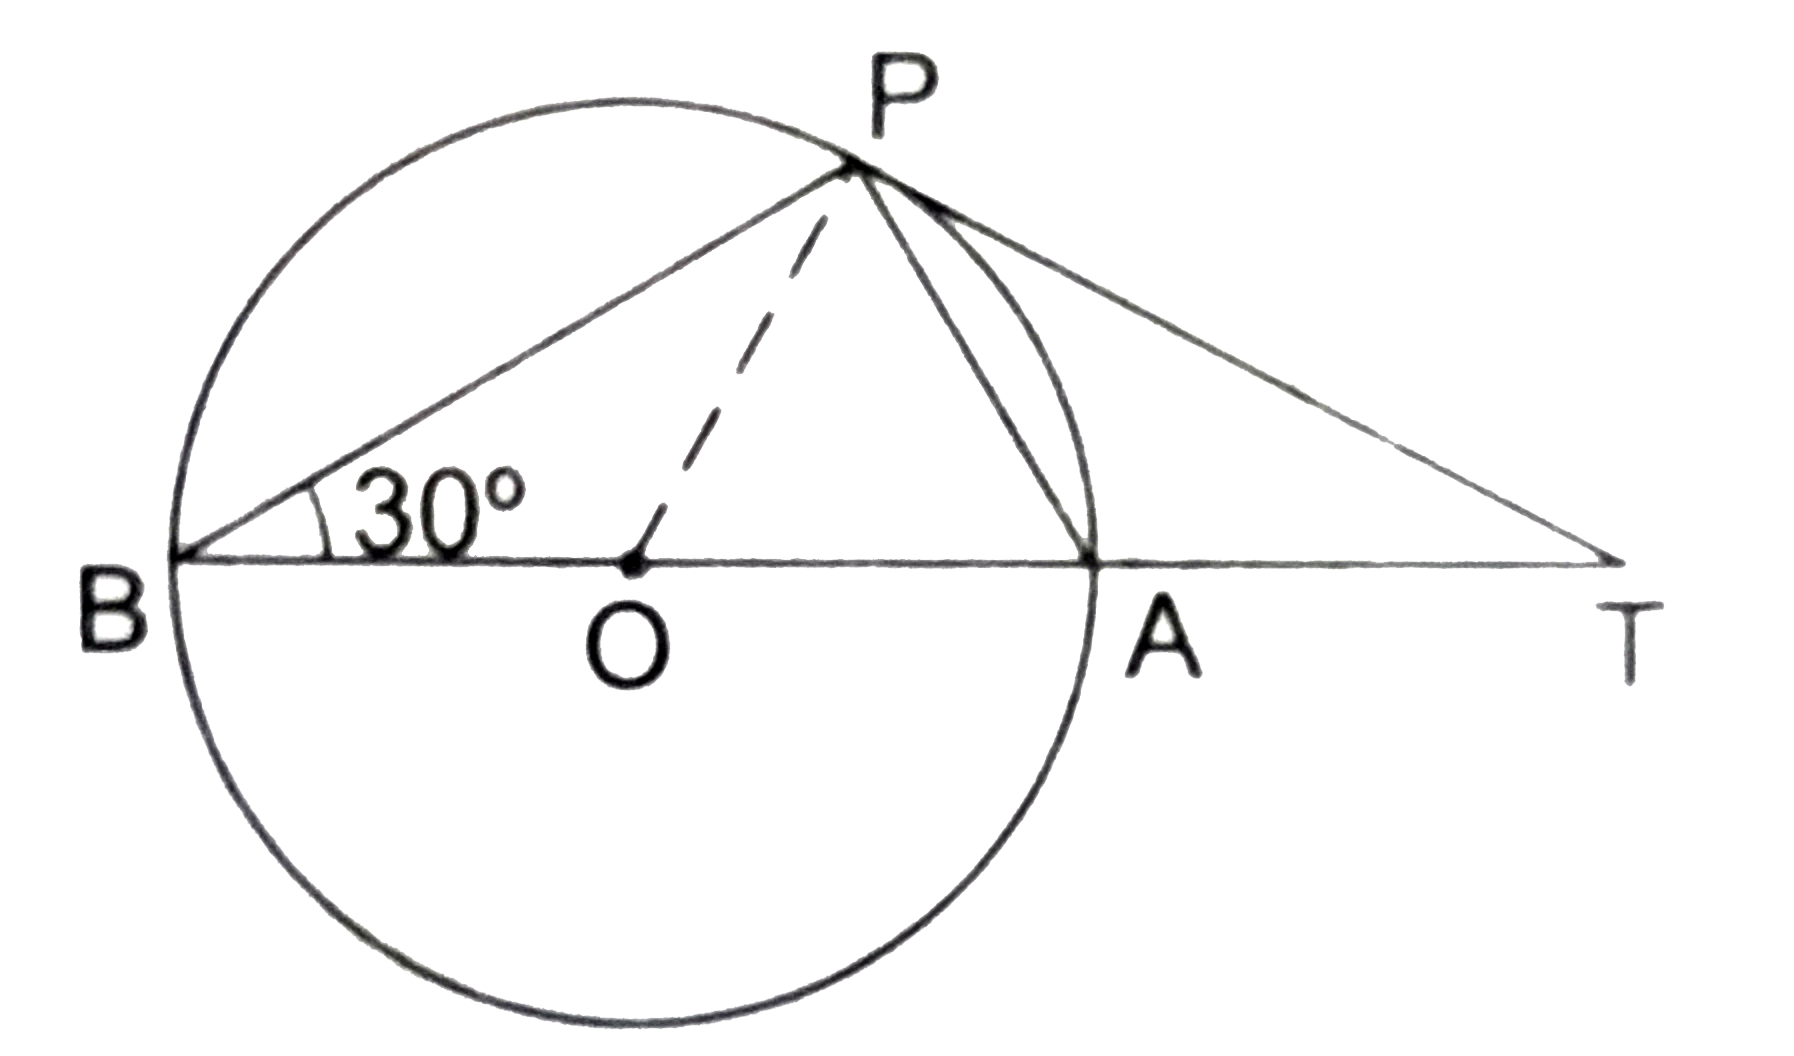 In the given figure, O is the centre of a circle, BOA is its diameter and the tangent at the point P meets BA extended at T. If /PBO=30^(@) then /PTA=?